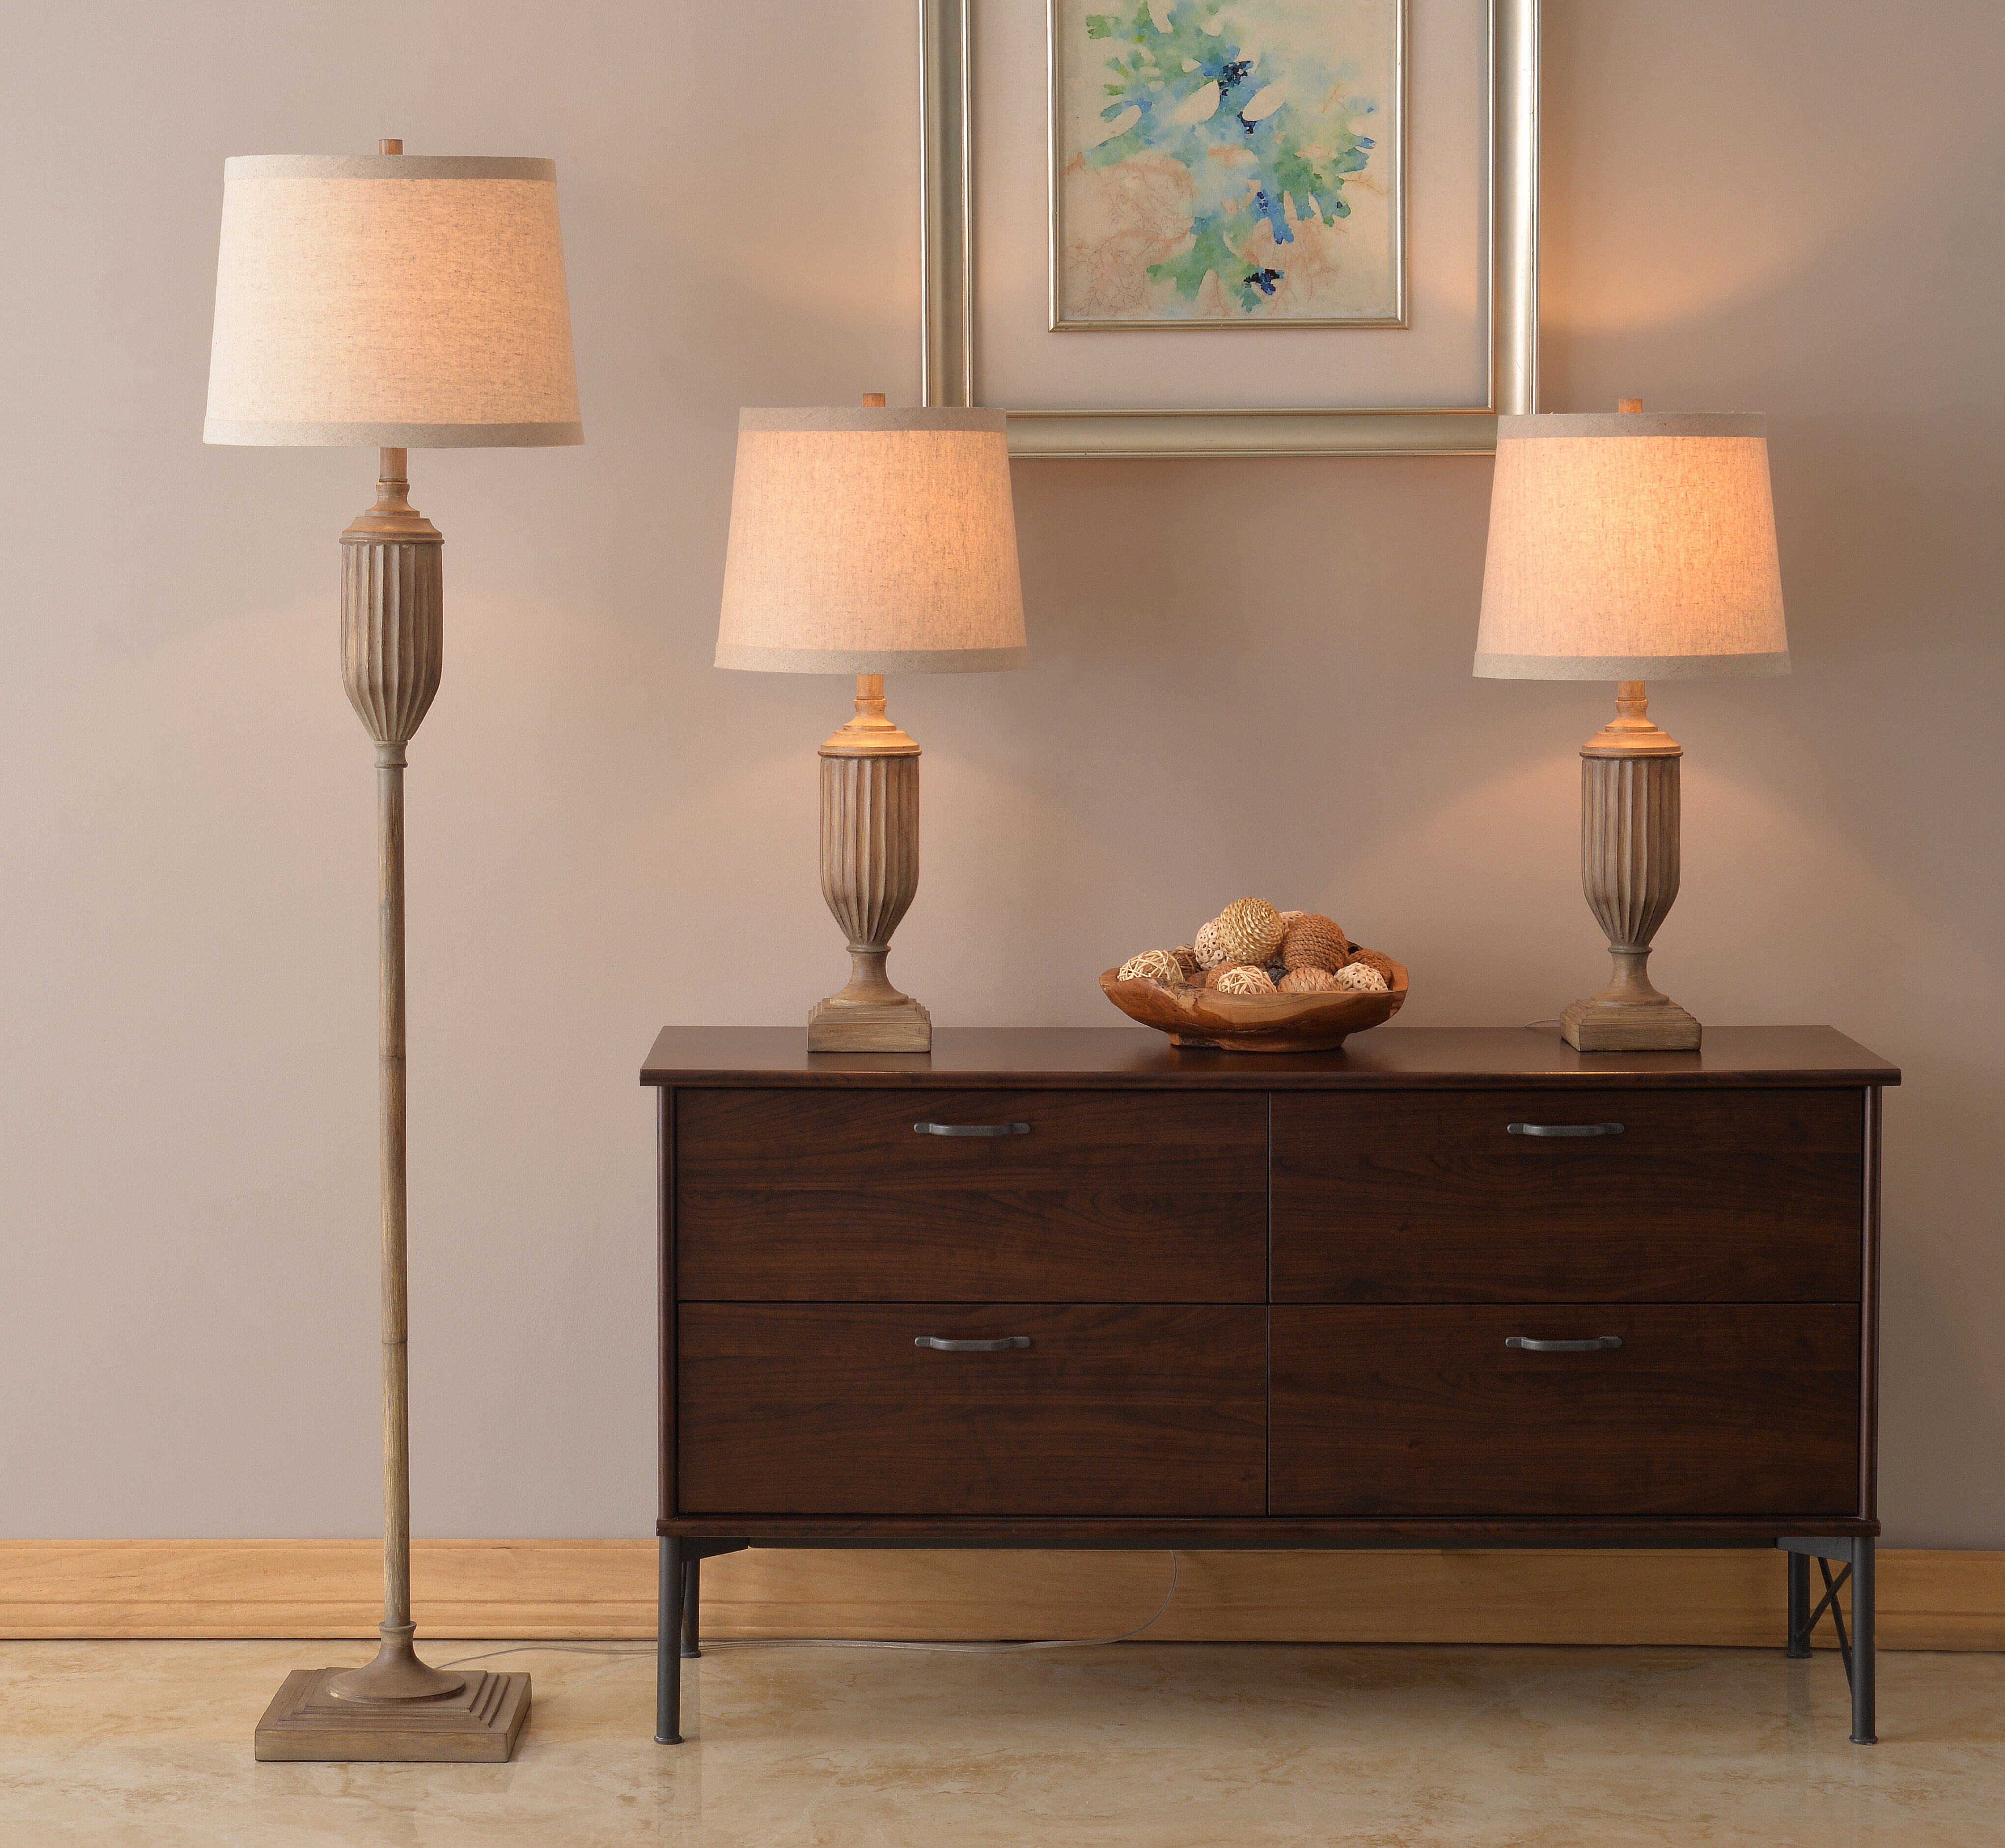 Charlton Home Schuck Buffet Floor And Table Lamp Set Reviews